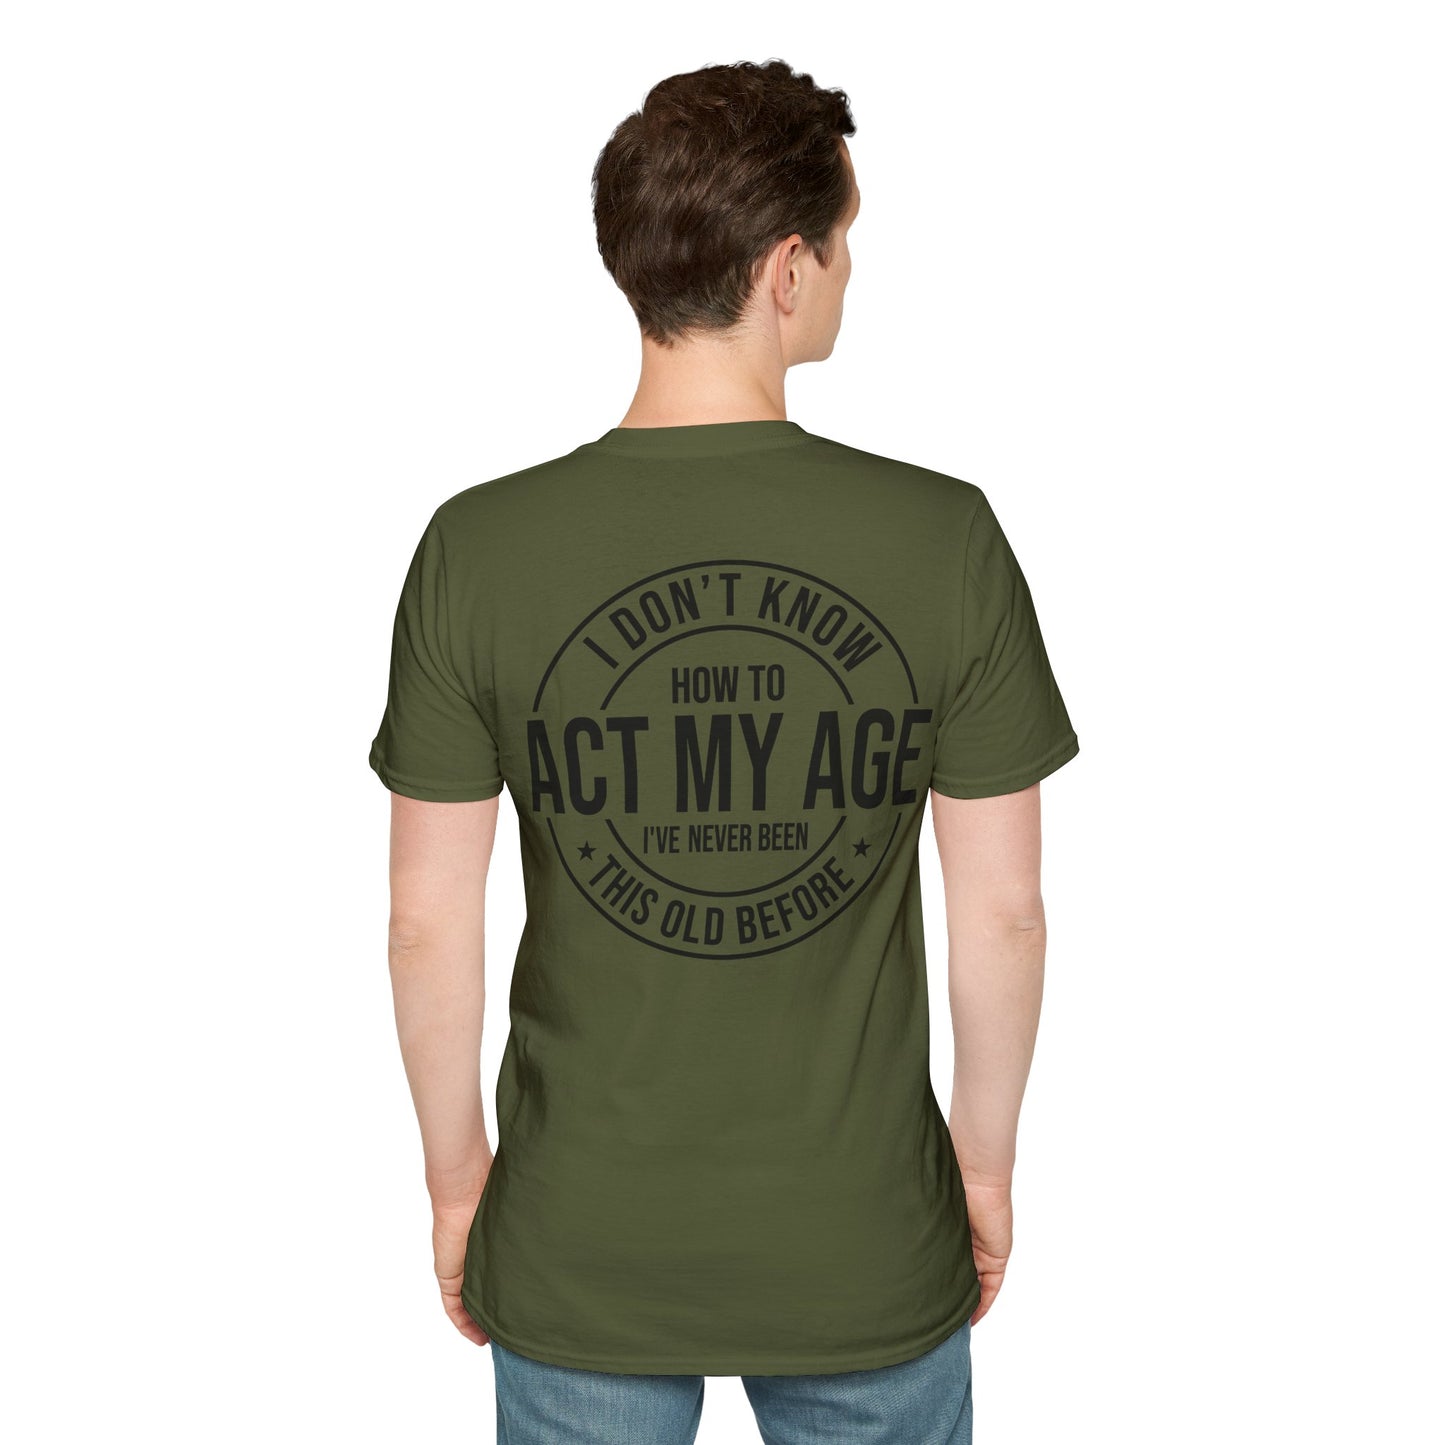 "I Dont Know How To Act My Age Ive Never Been This Old Before" Unisex Softstyle T-Shirt